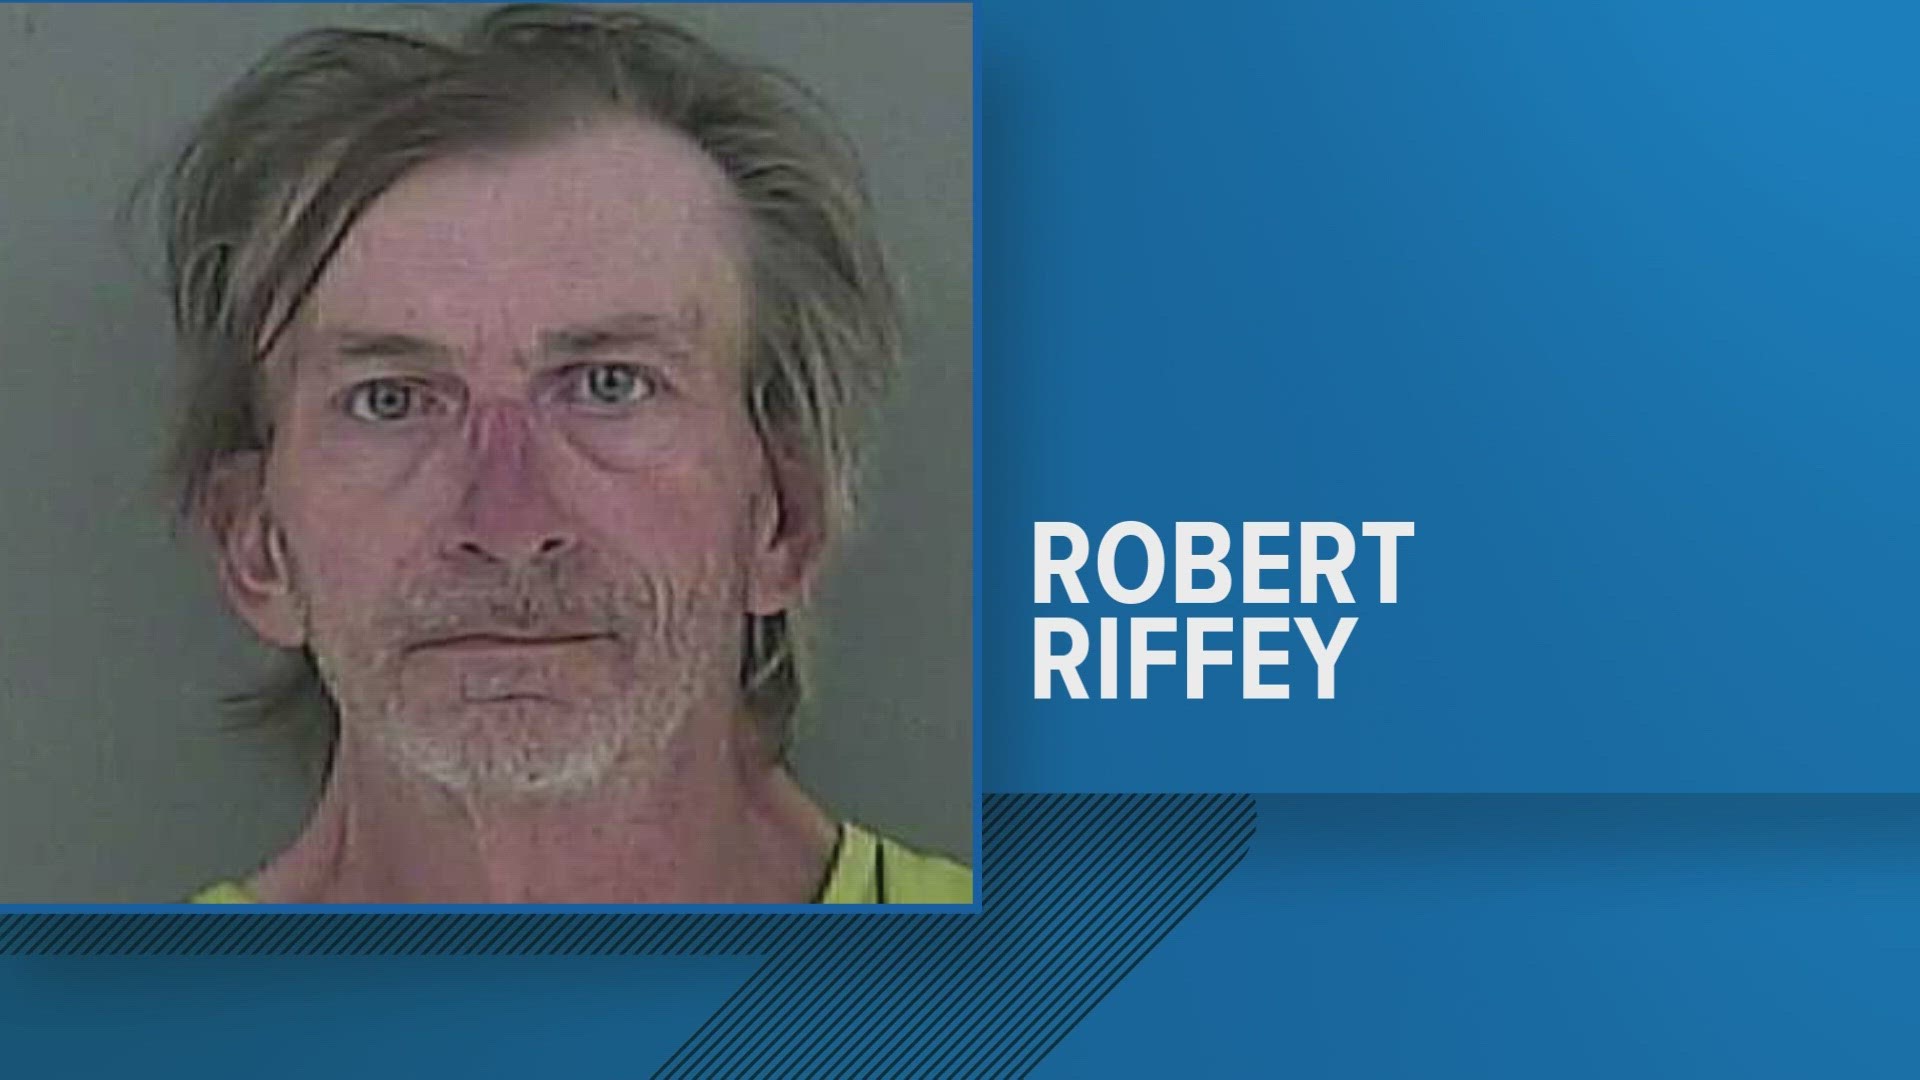 57-year-old Robert Riffey is accused of giving drugs to a man who later died from an overdose in 2021.